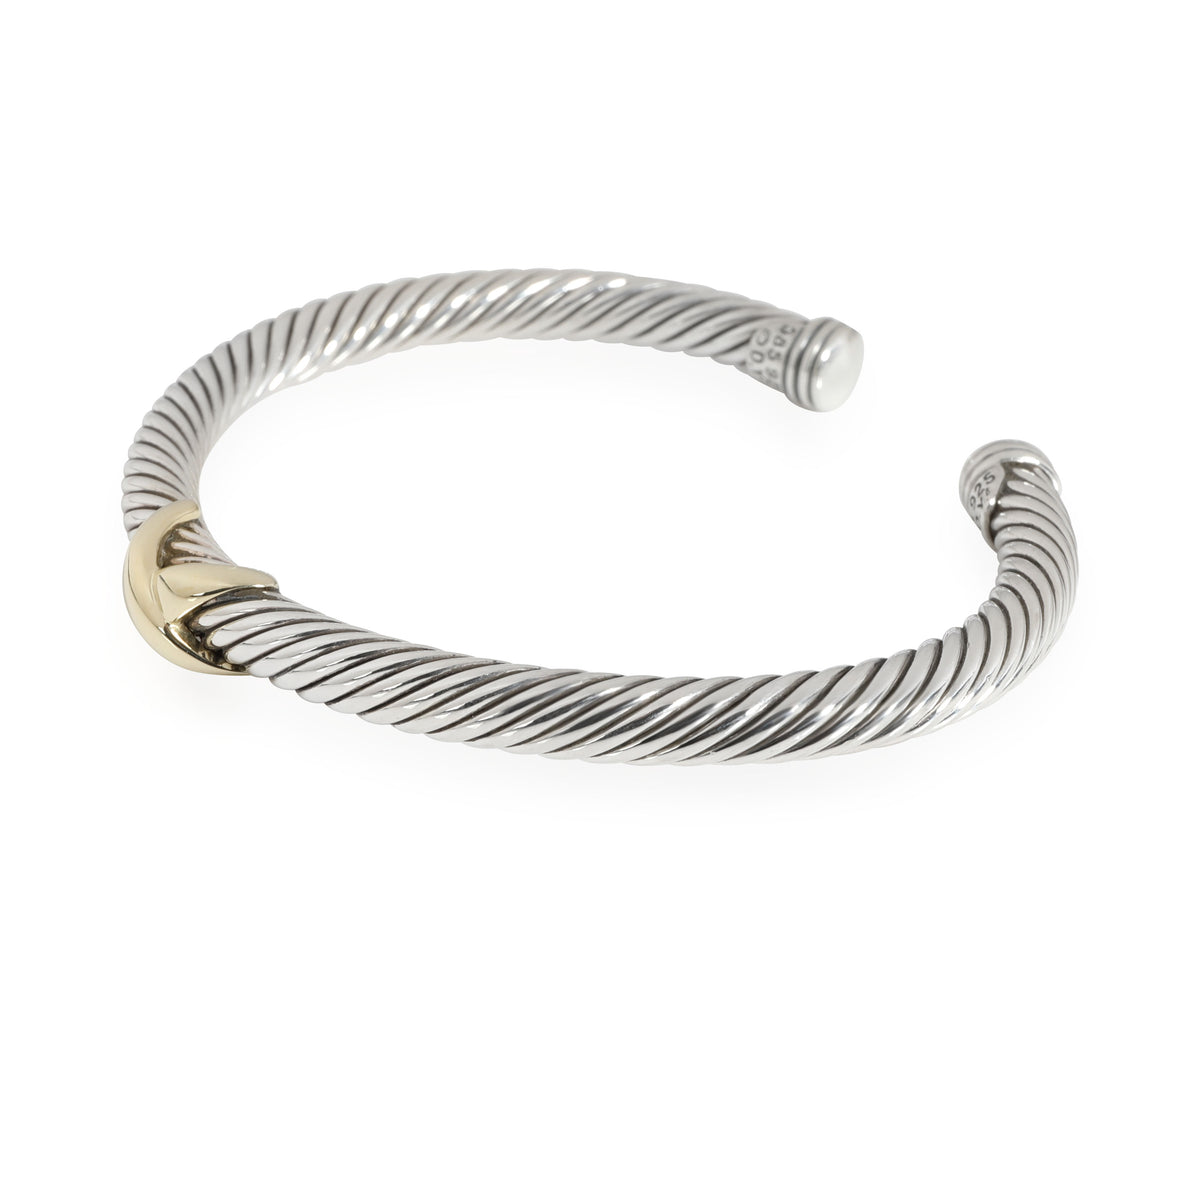 David Yurman X Cable Cuff in 14K Yellow Gold/Sterling Silver